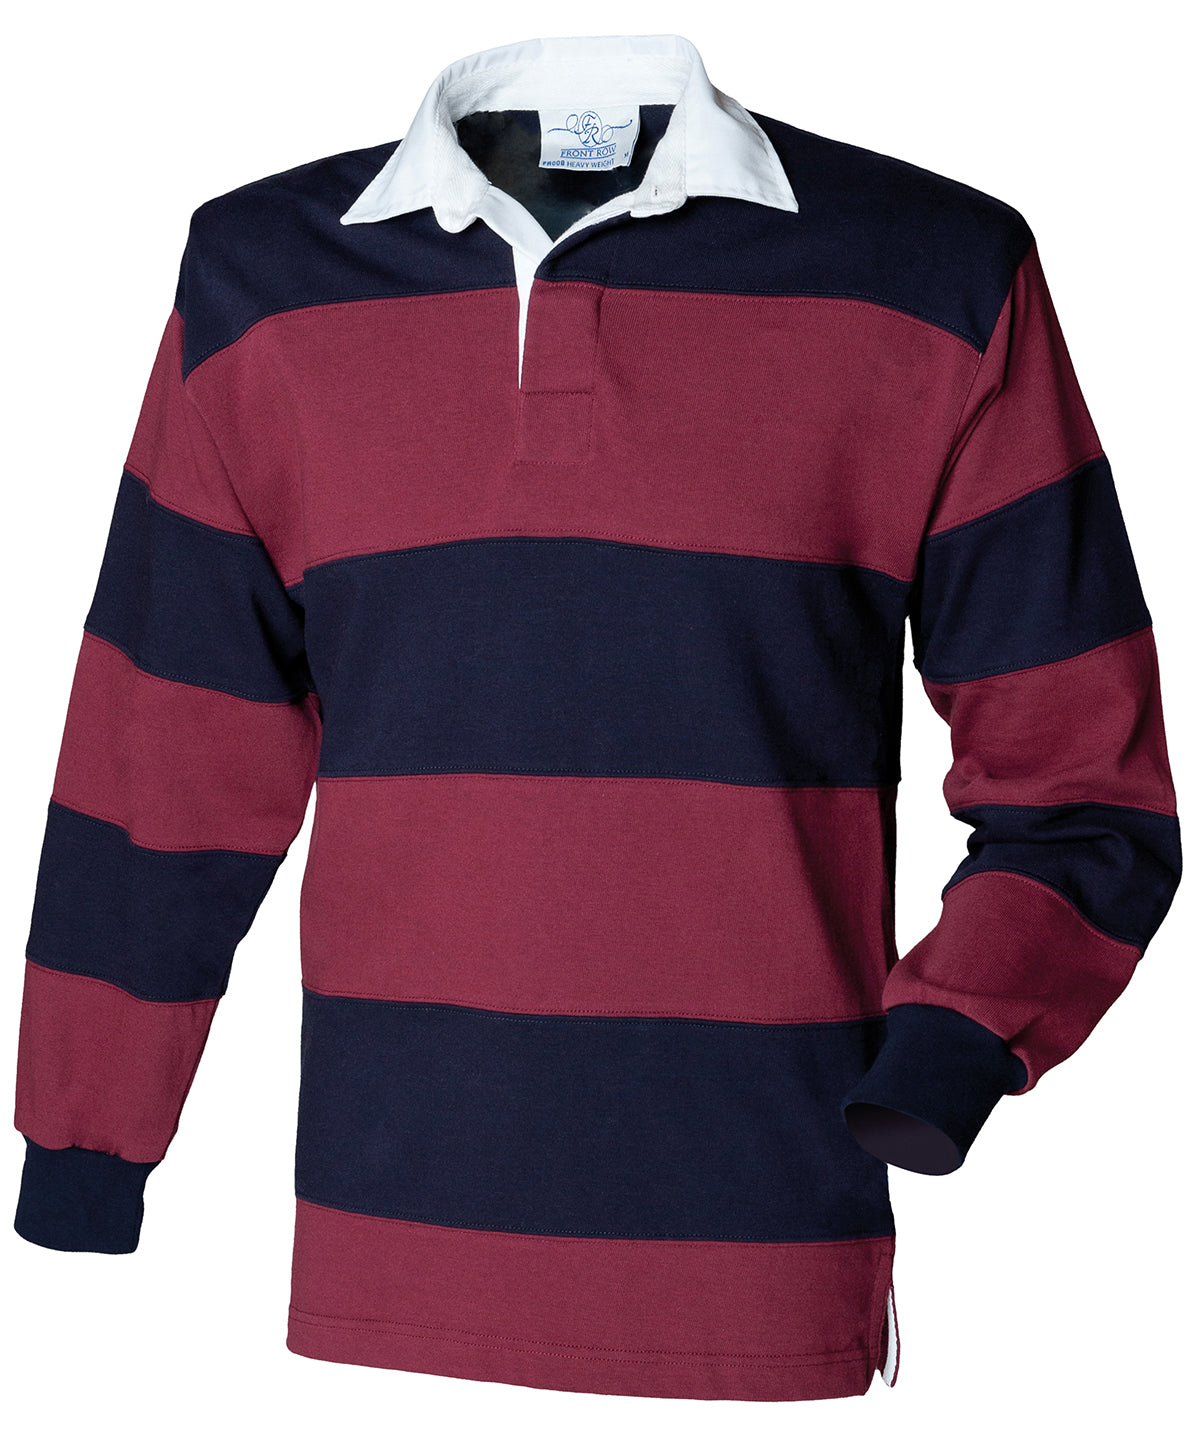 Personalised Polo Shirts - Stripes Front Row Sewn stripe long sleeve rugby shirt